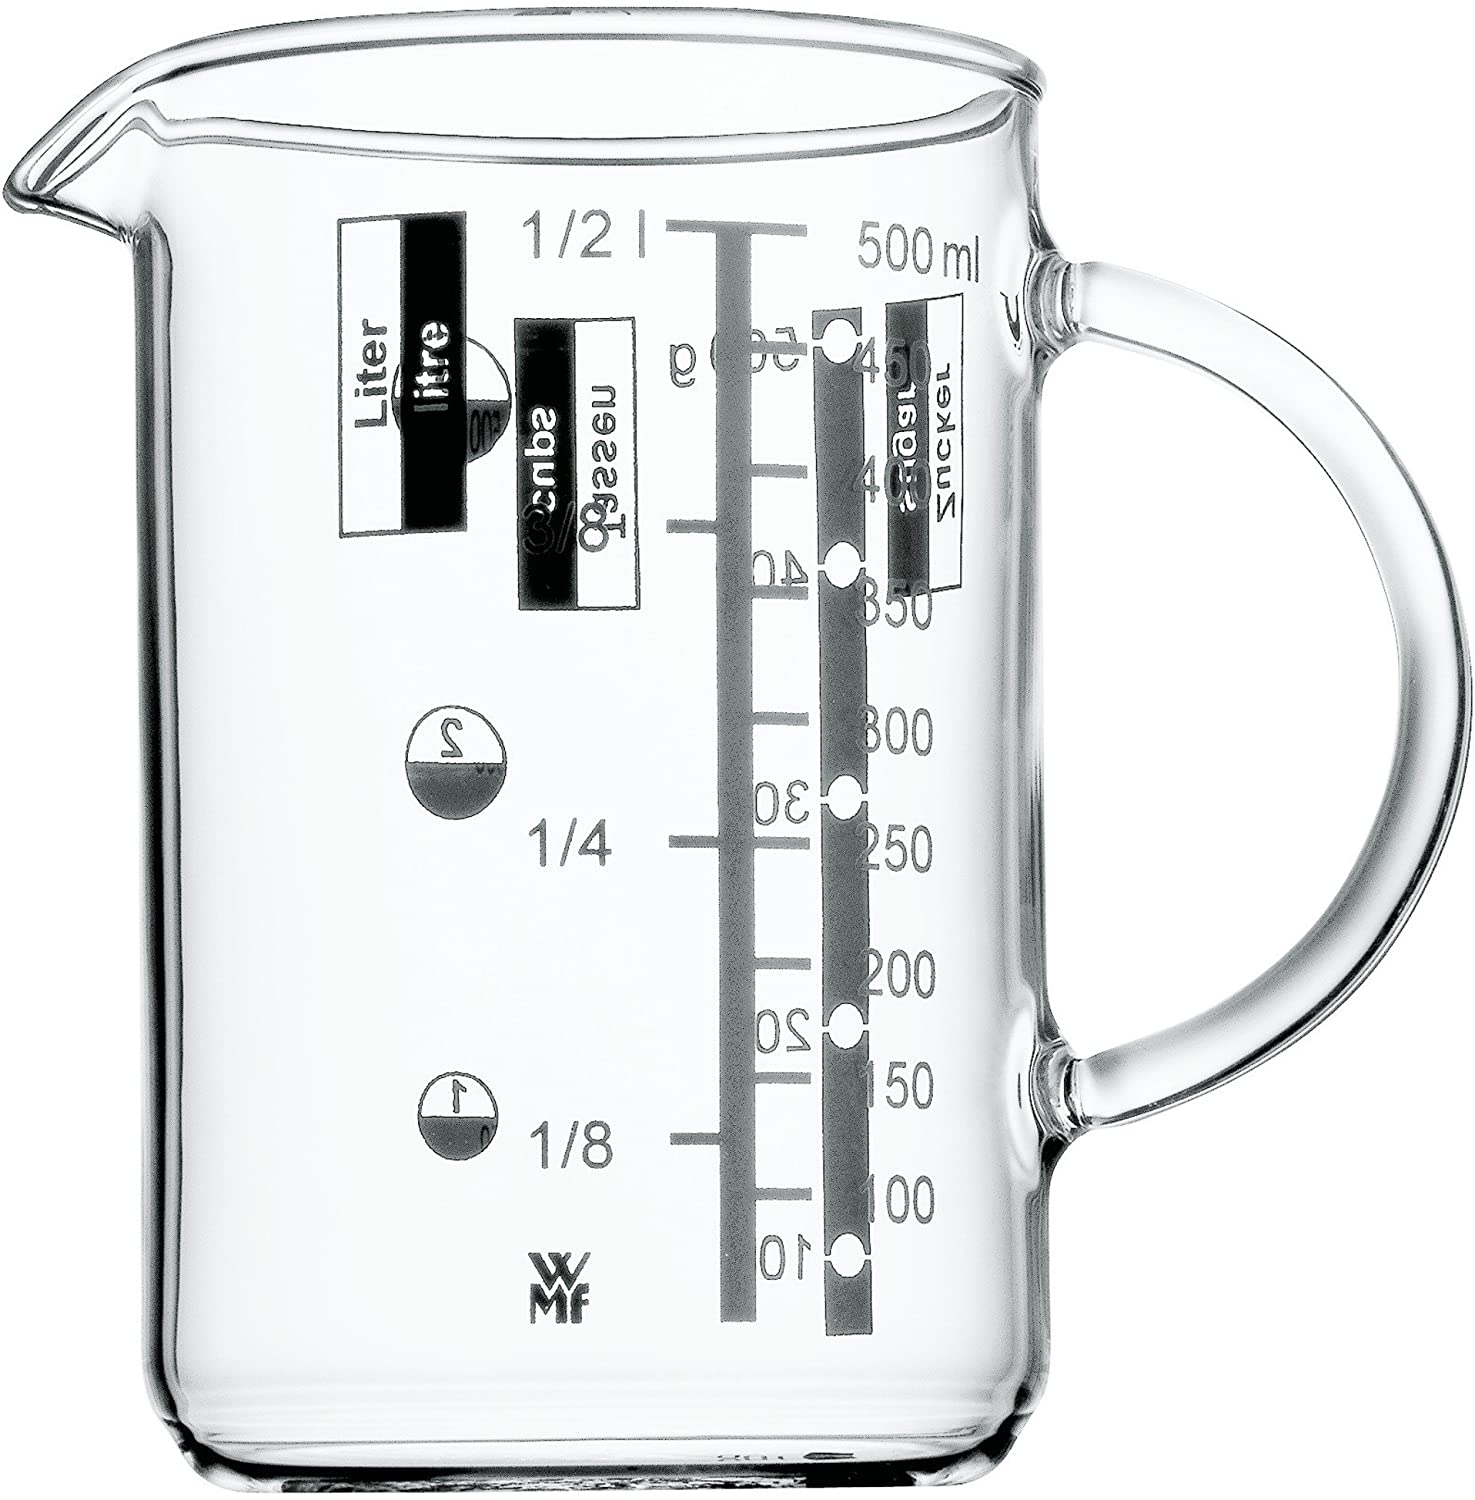 WMF Gourmet Glass Measuring Cup, 0.5 Litre, Heat Resistant Glass, Scale for Litres, Millilitres, Cups and Grams